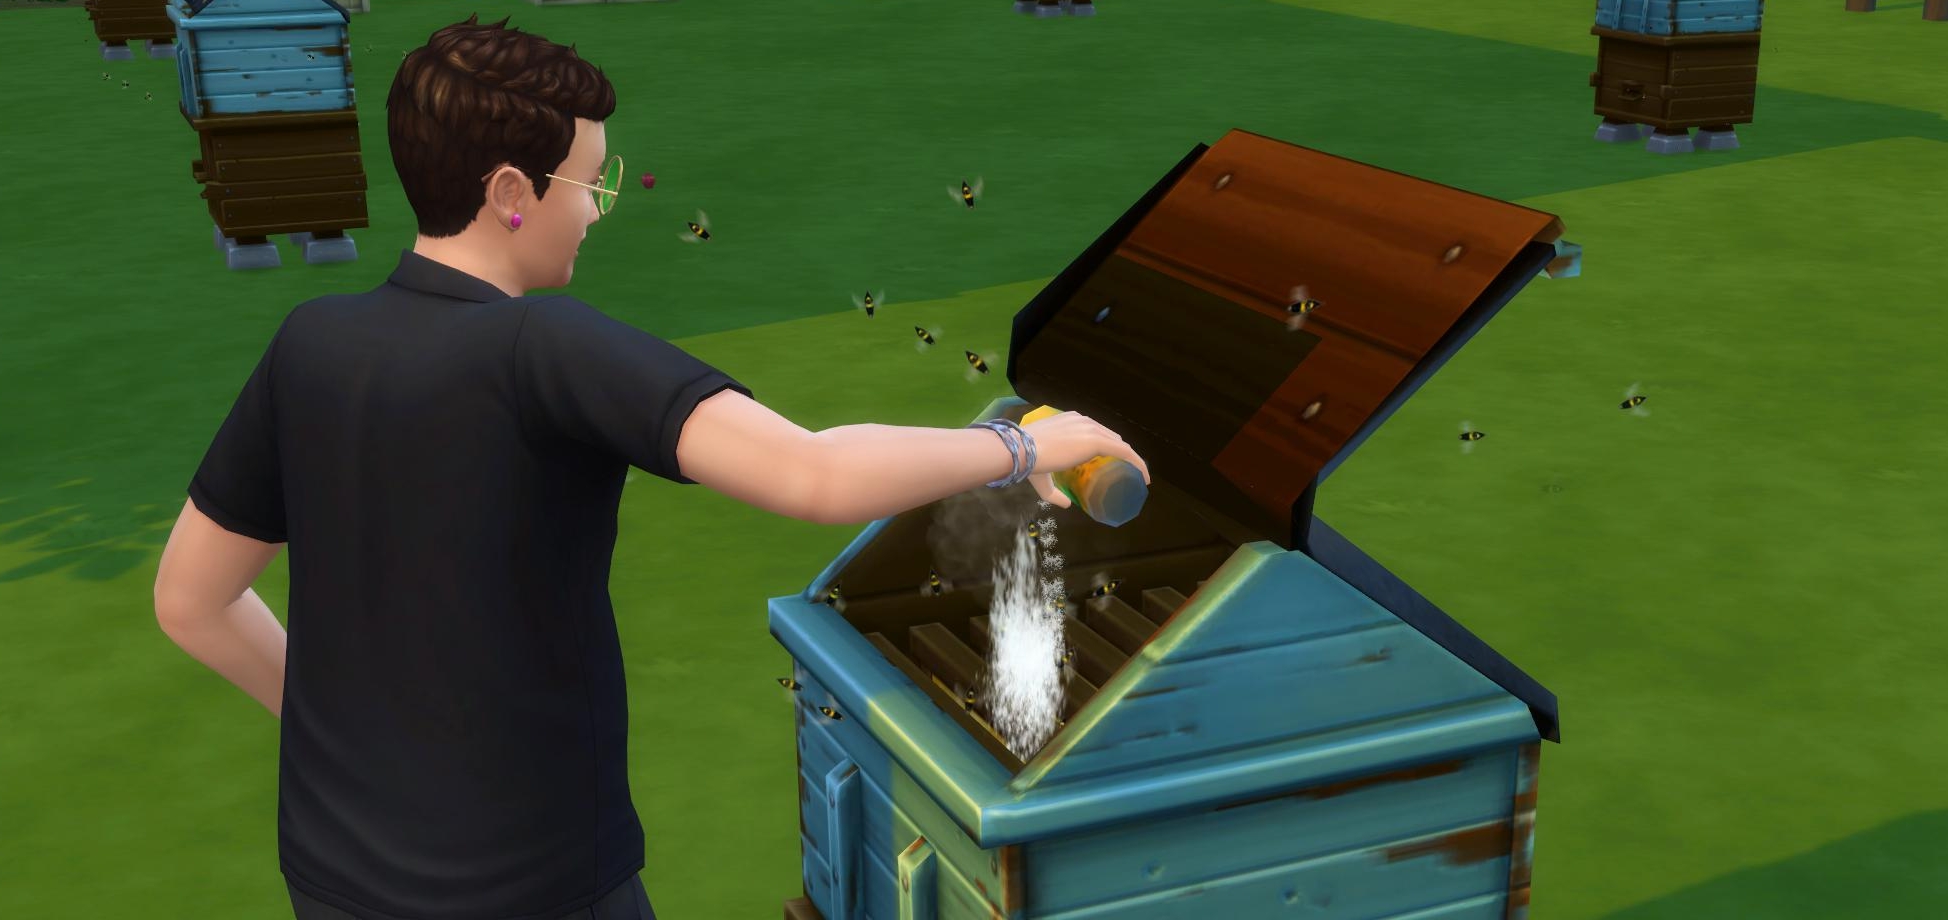 Mite treatment for bees in The Sims 4 Seasons